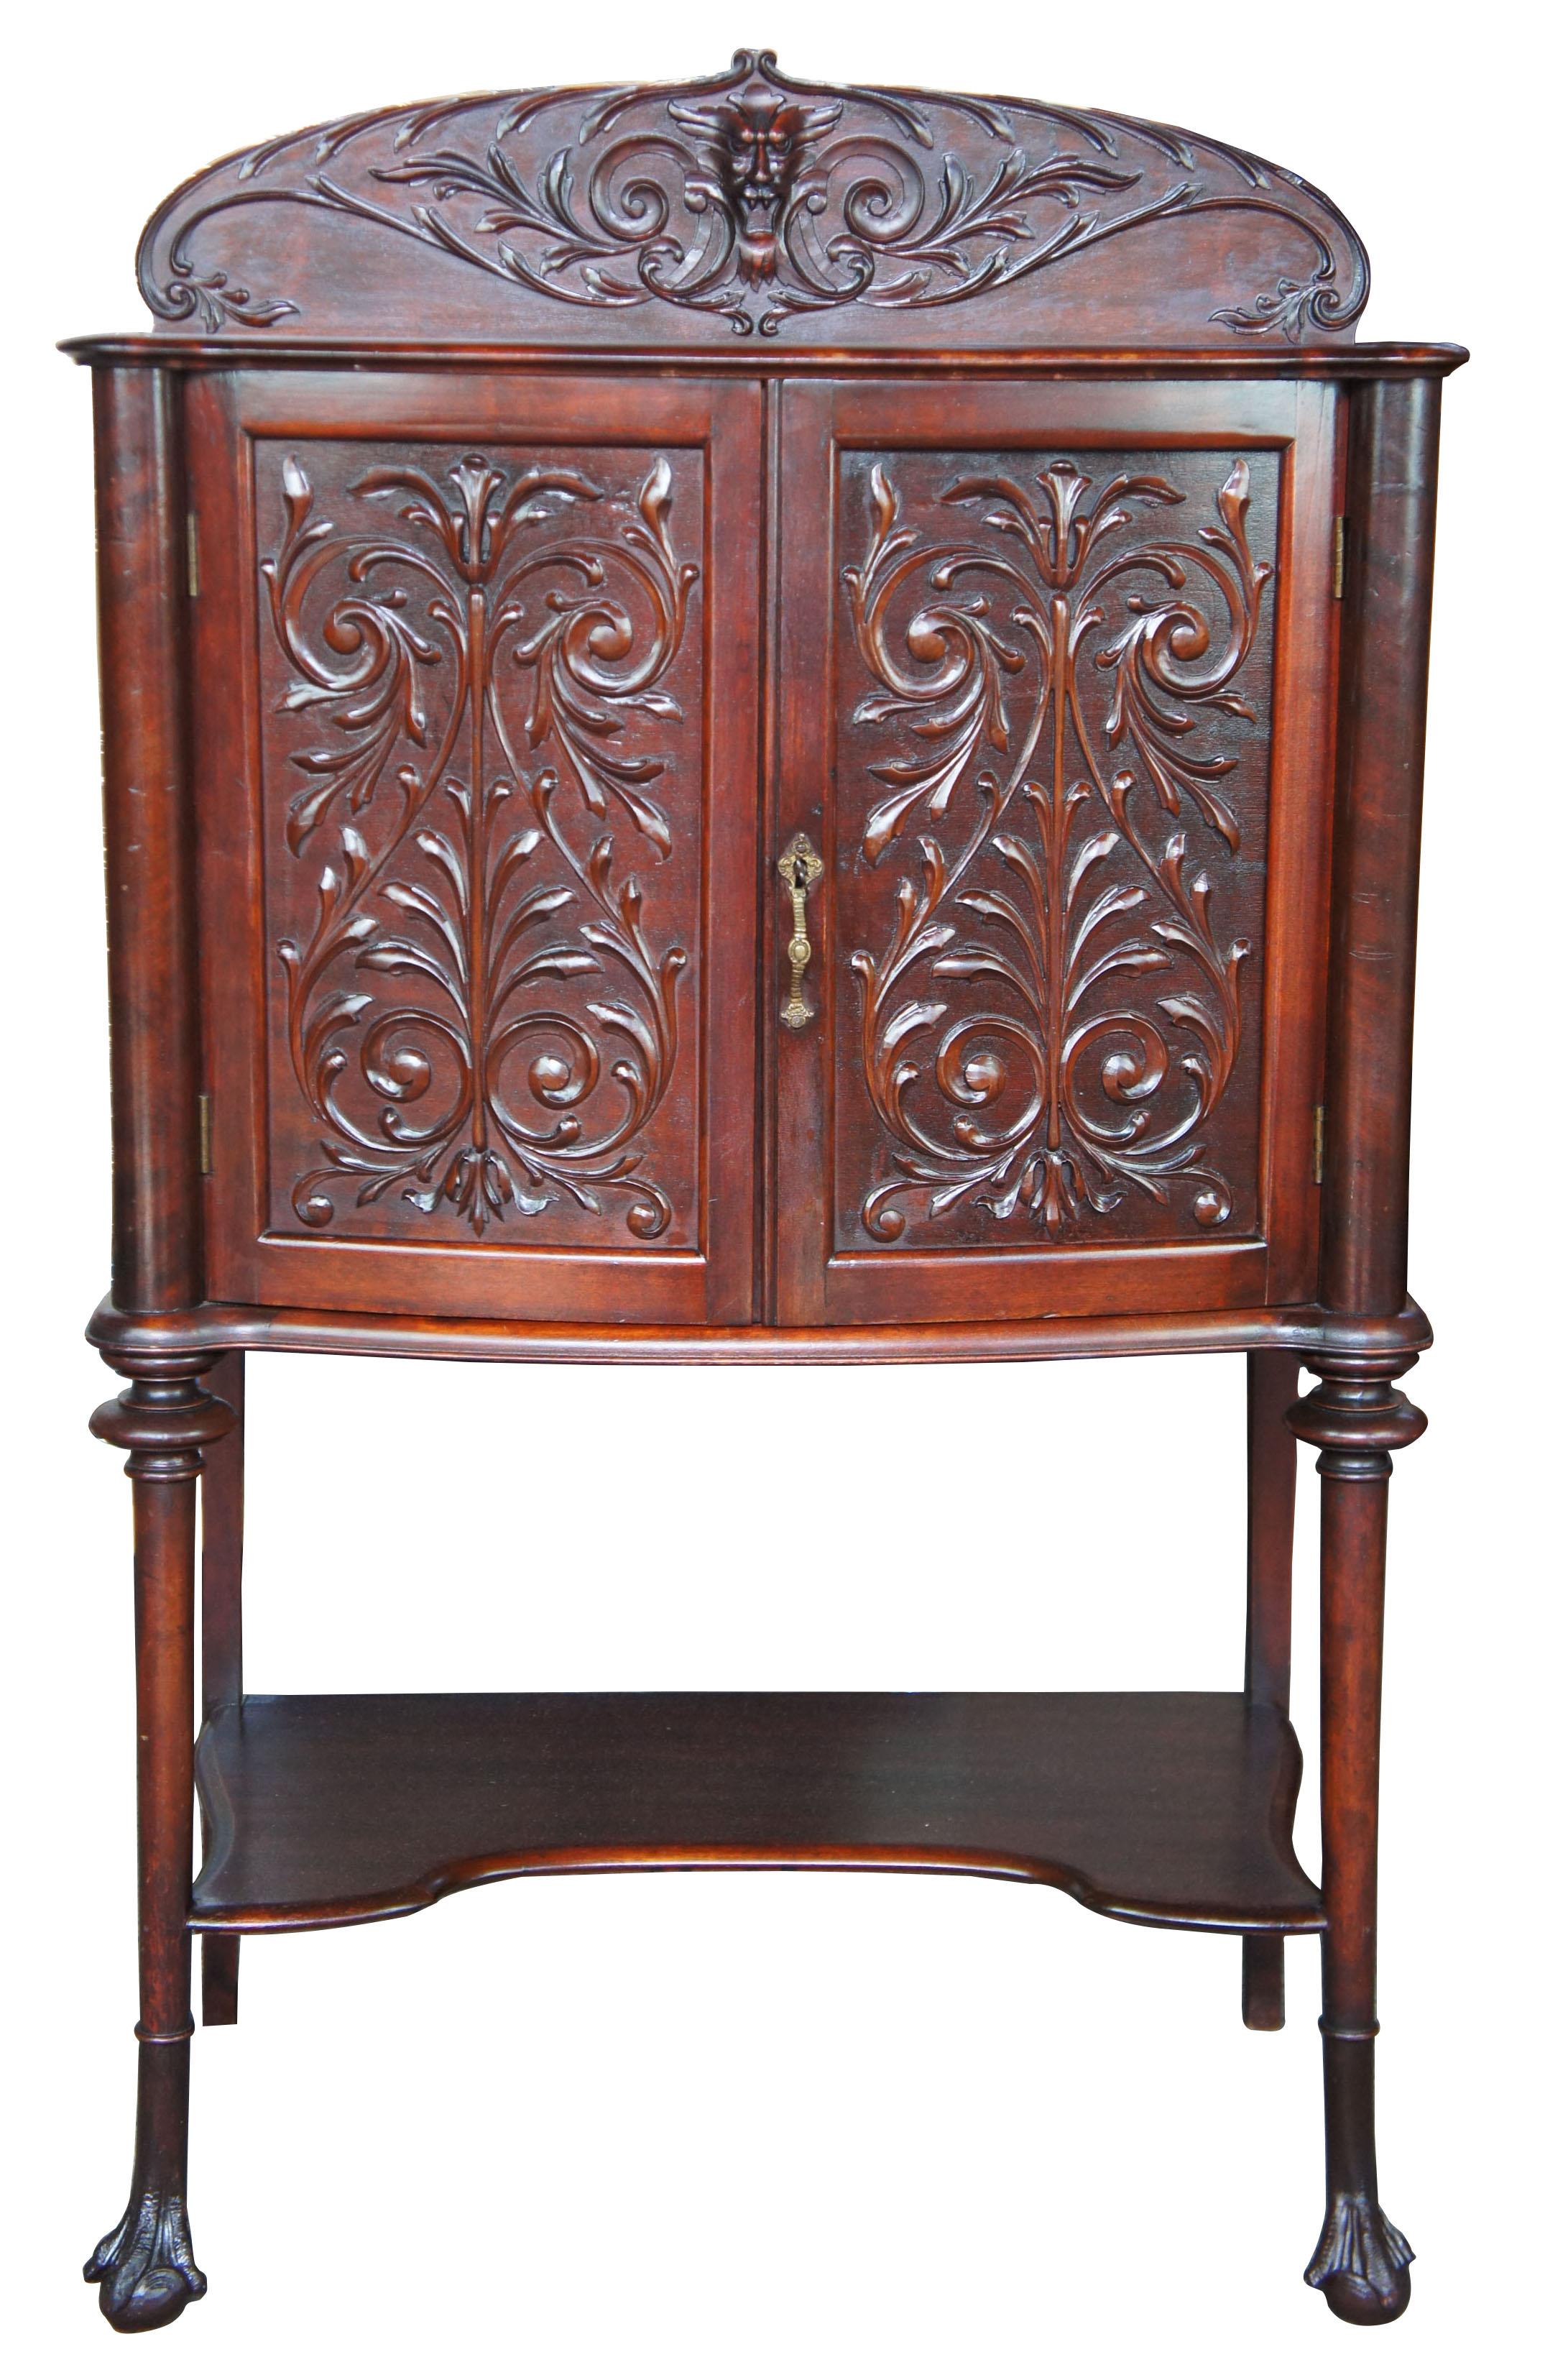 Late Victorian carved mahogany music cabinet ball and claw foot backsplash dry bar

Late Victorian mahogany music cabinet. Empire inspired with curved supports leading to ball and claw feet. Includes carved doors and a figural backsplash with a